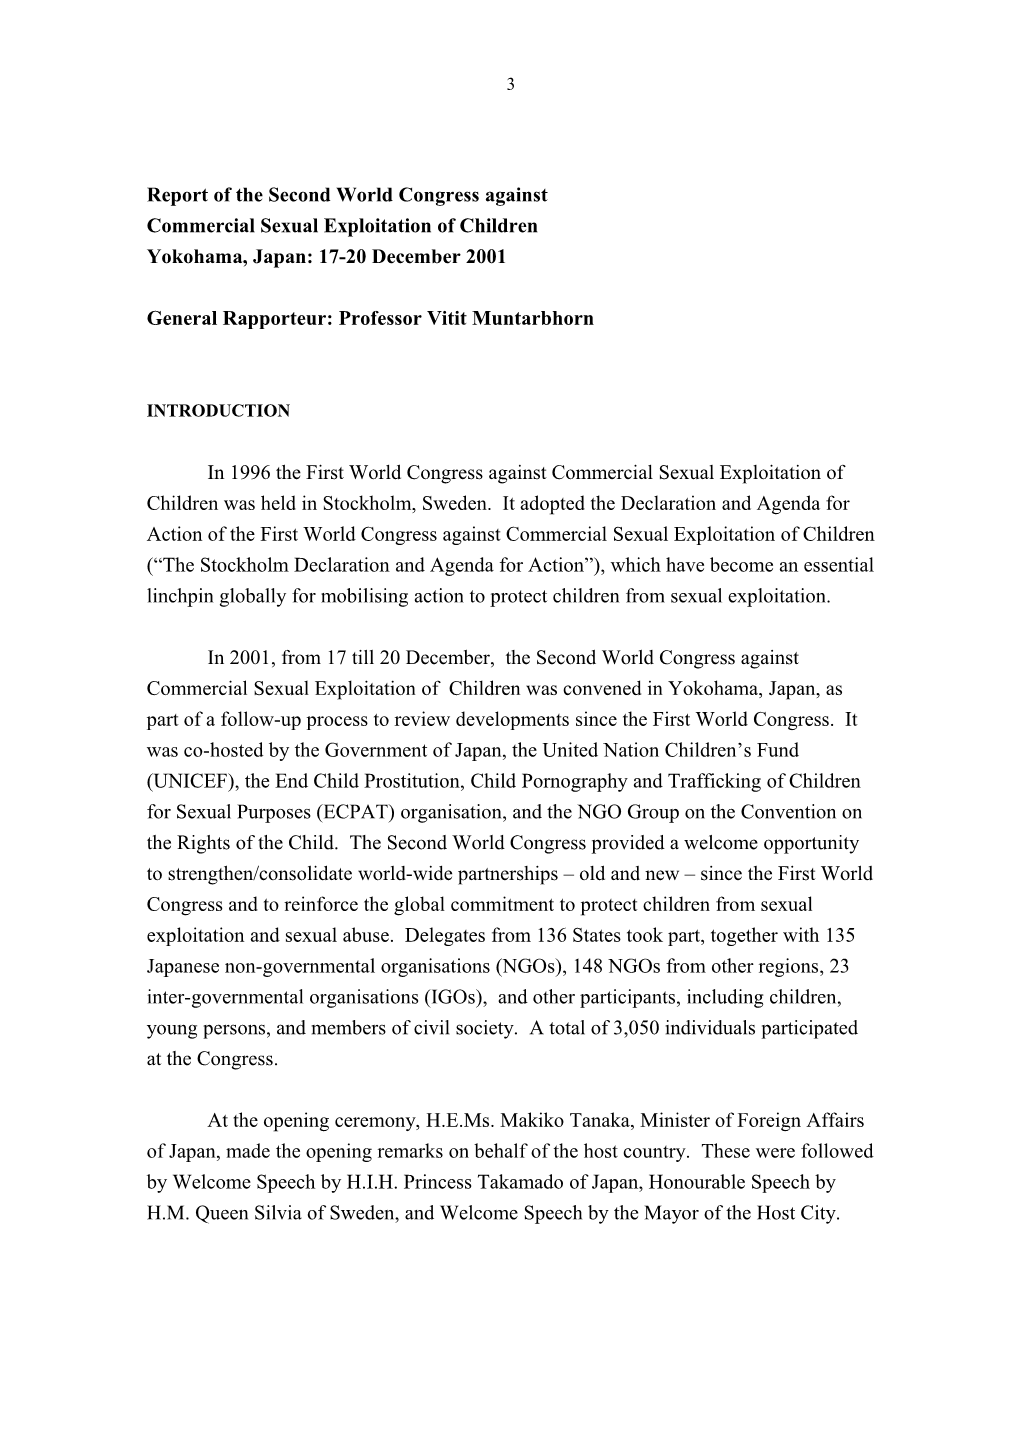 Report of the Second World Congress Against Commercial Sexual Exploitation of Children